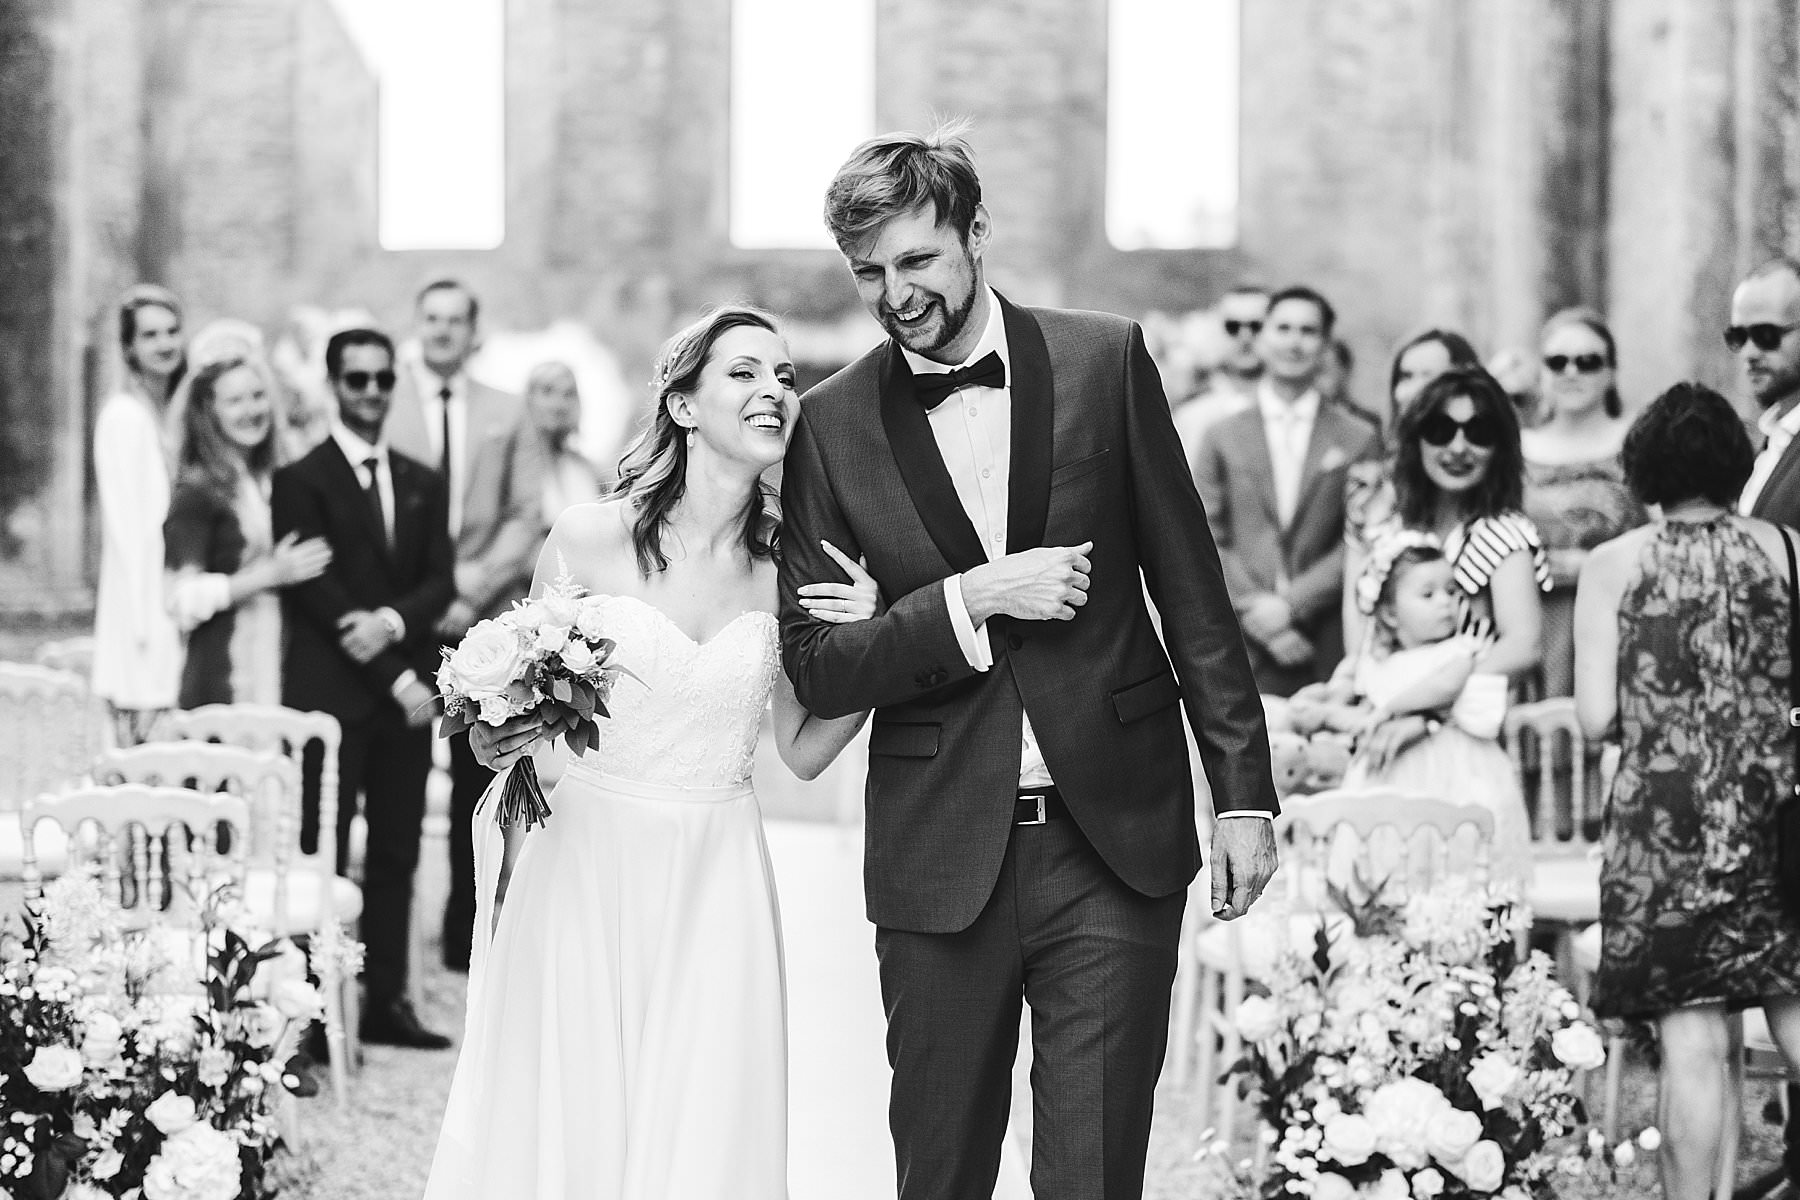 A one-of-a-kind celebration near Siena at Roofless Abbey of San Galgano intimate wedding in Tuscany